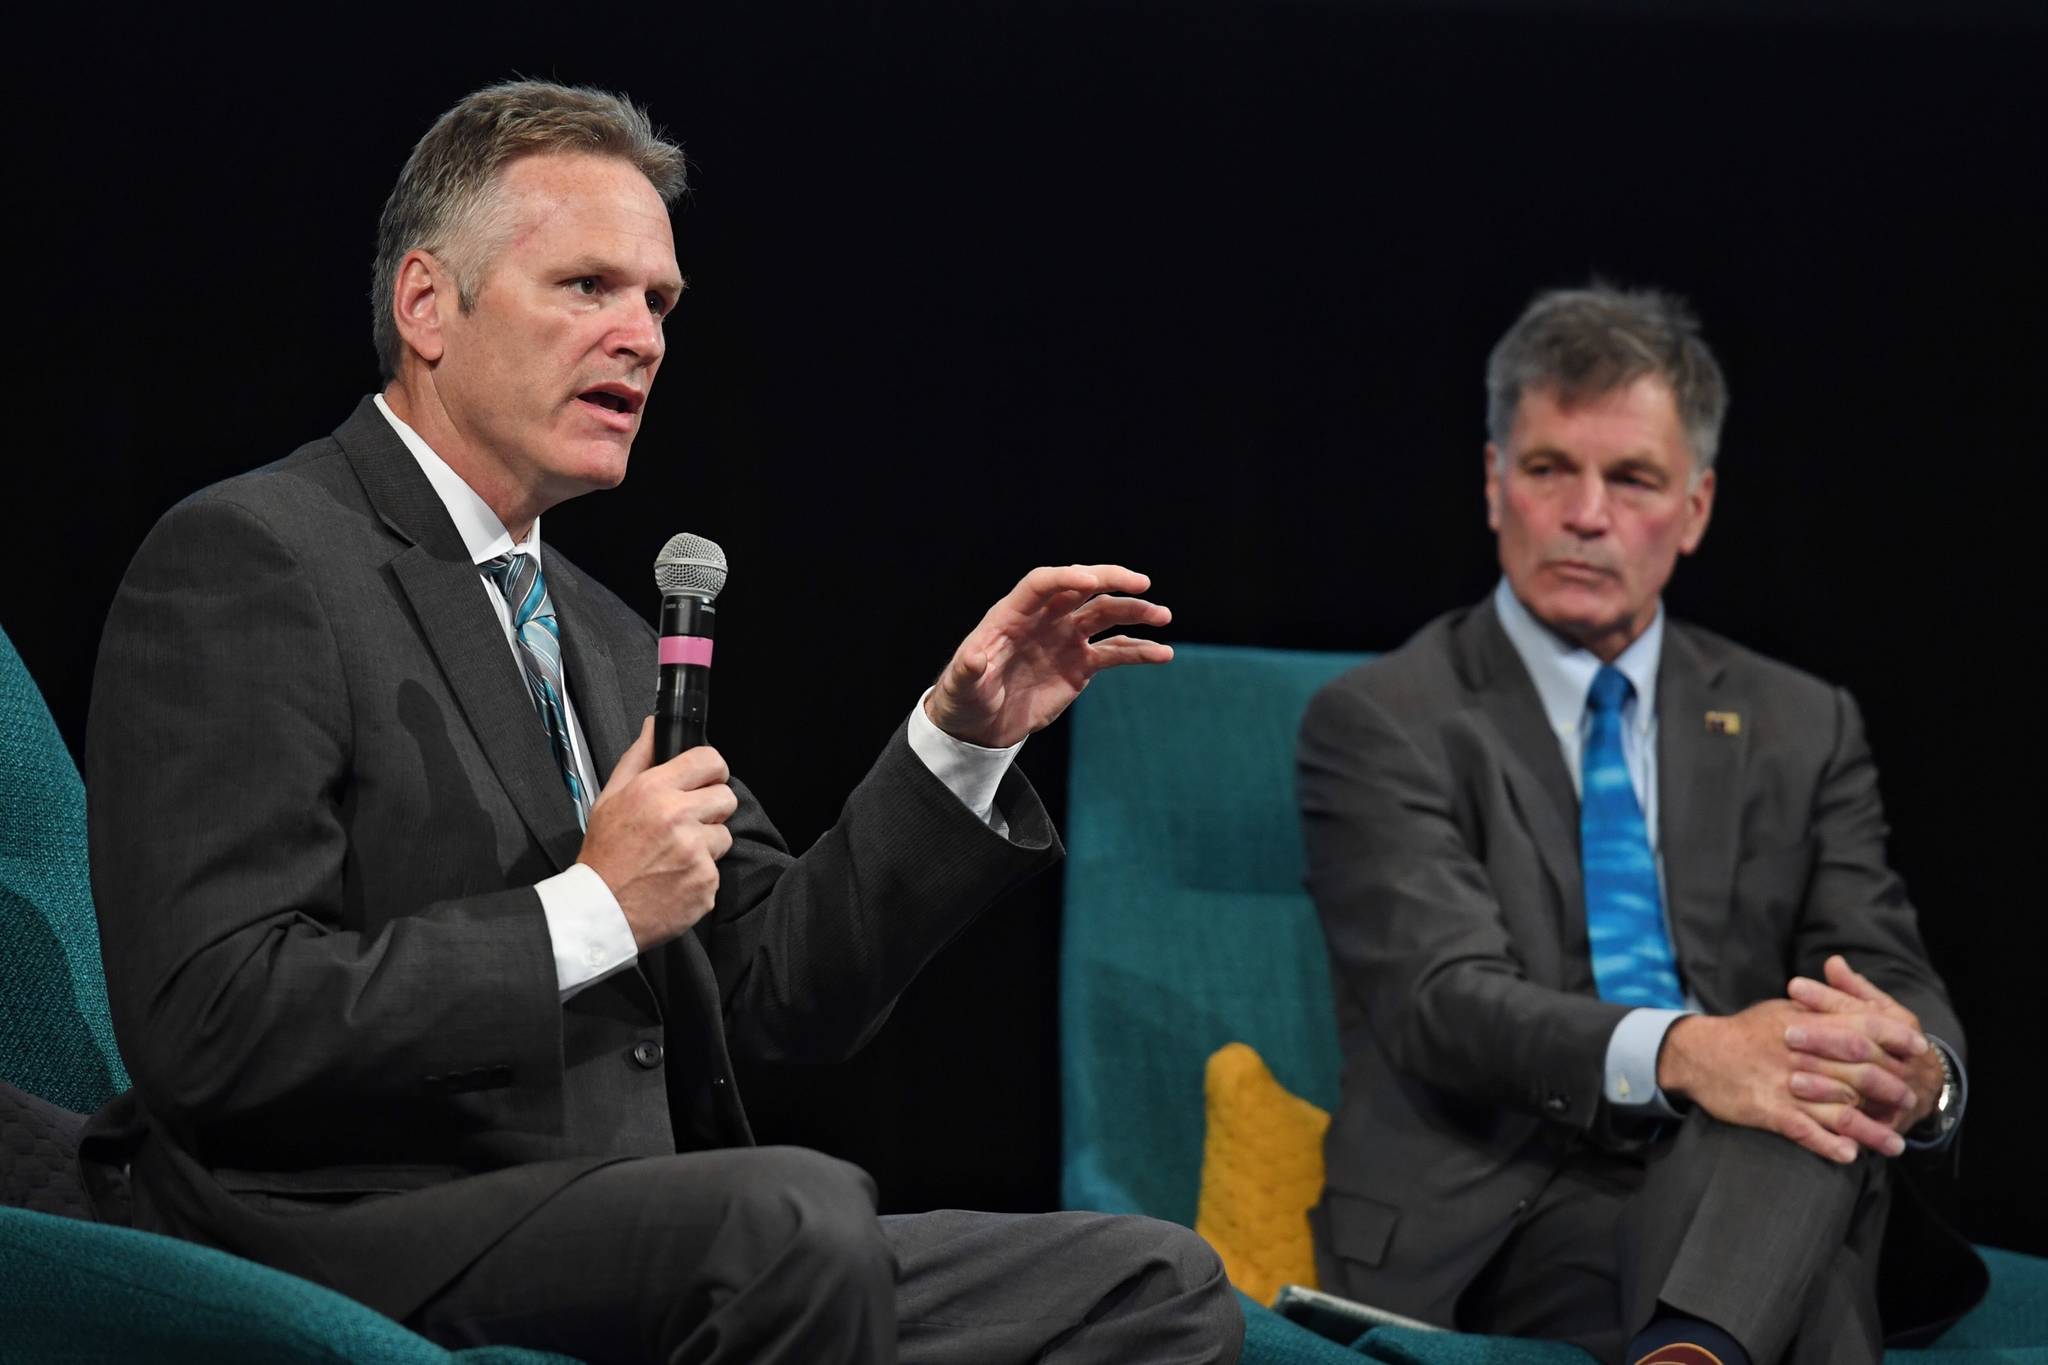 Alaska Gov. Mike Dunleavy, left, speaks with Wyoming Gov. Mark Gordon about the differences of their states during the annual meeting of the International Forum of Sovereign Wealth Funds at Centennial Hall on Thursday, Sept. 12, 2019. (Michael Penn| Juneau Empire)